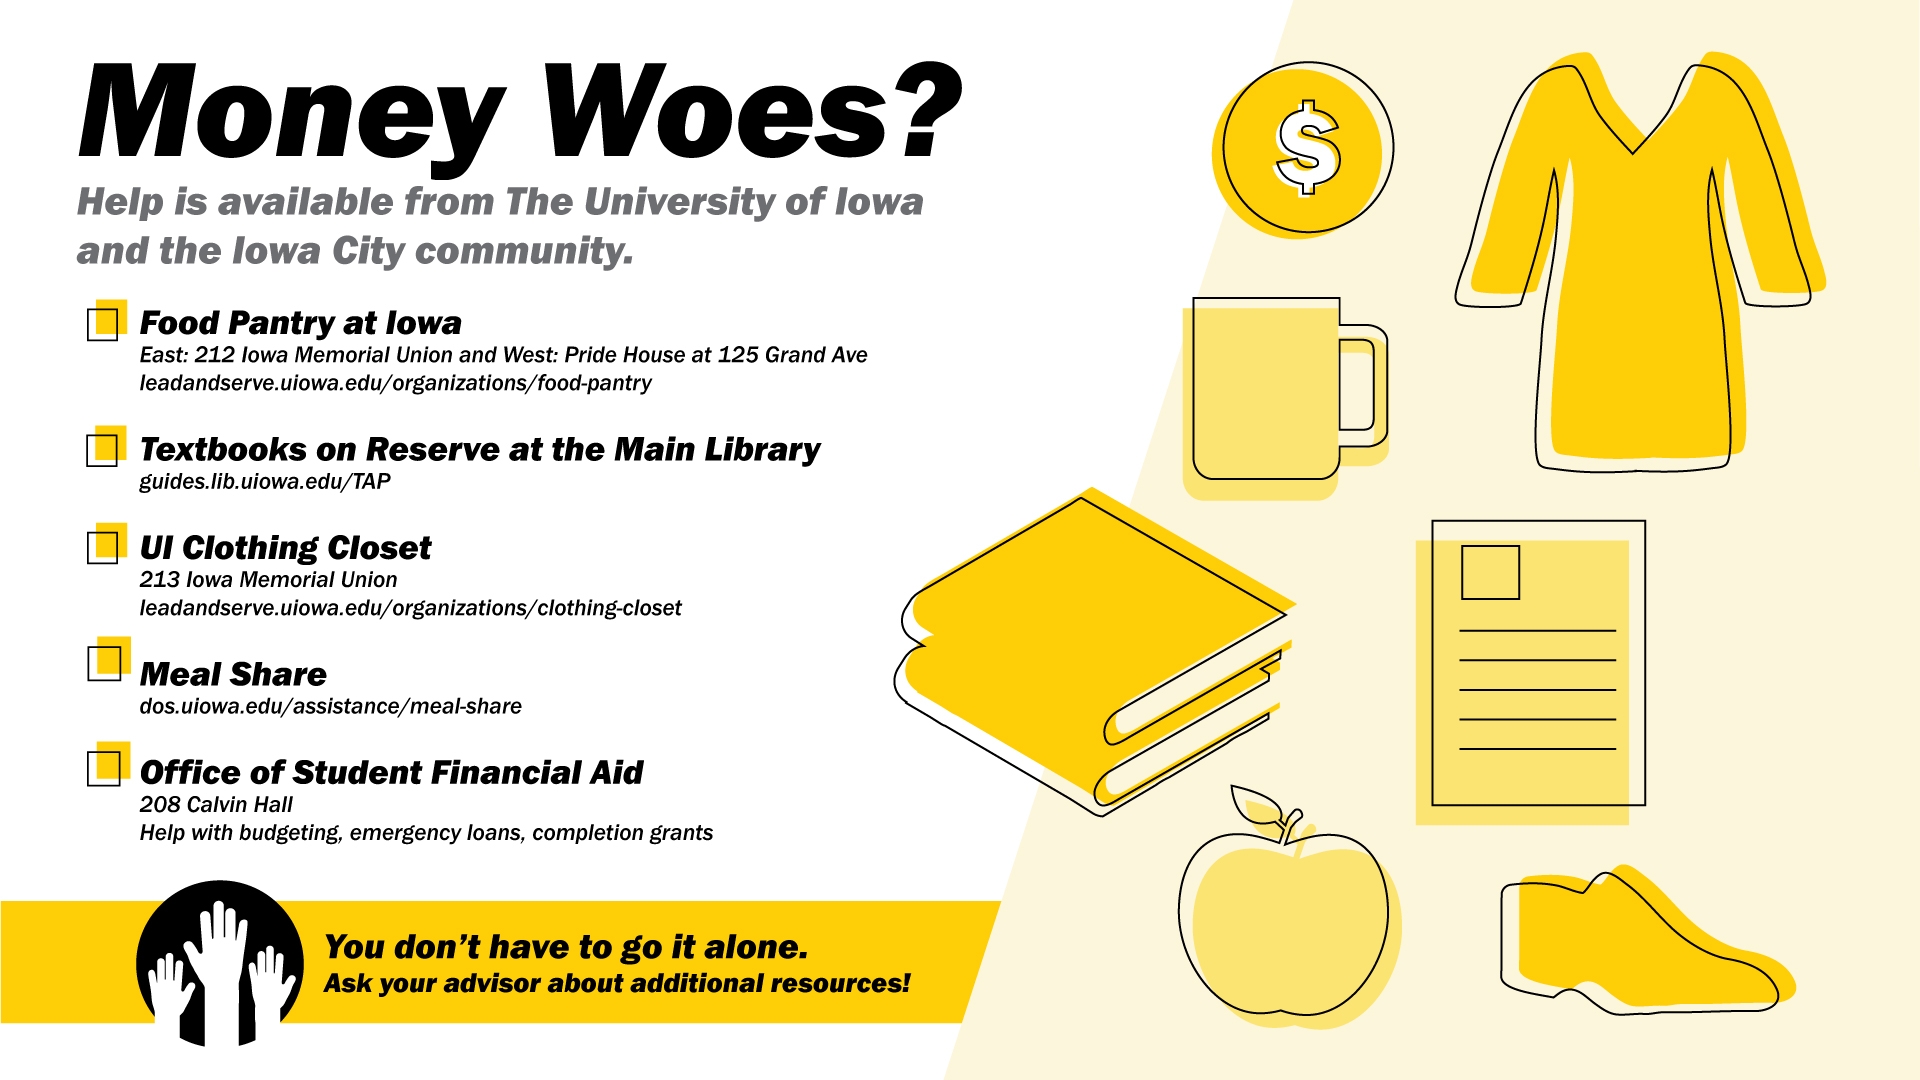 Money Woes? You don't have to do it alone. Ask your advisor about additional resources!